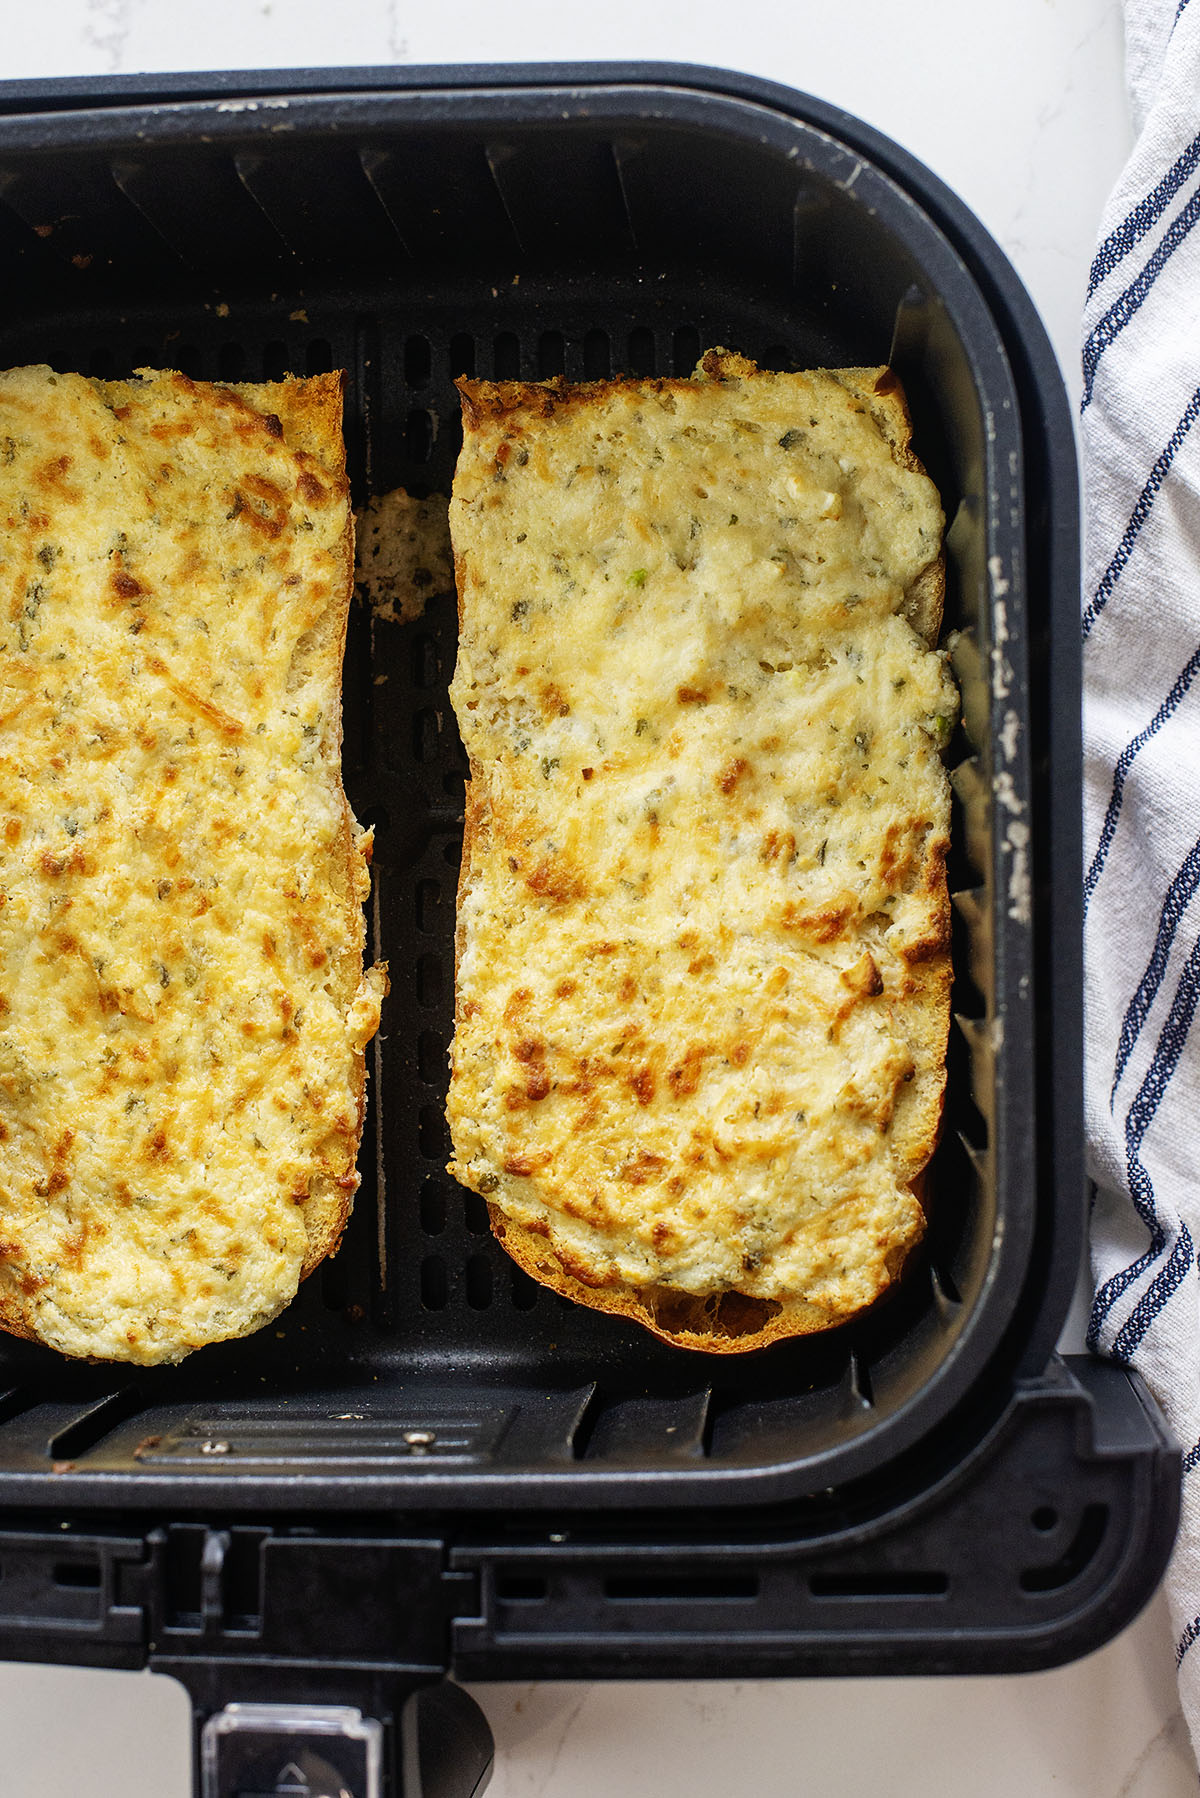 Two halves of garlic cheese bread in an air fryer basket.